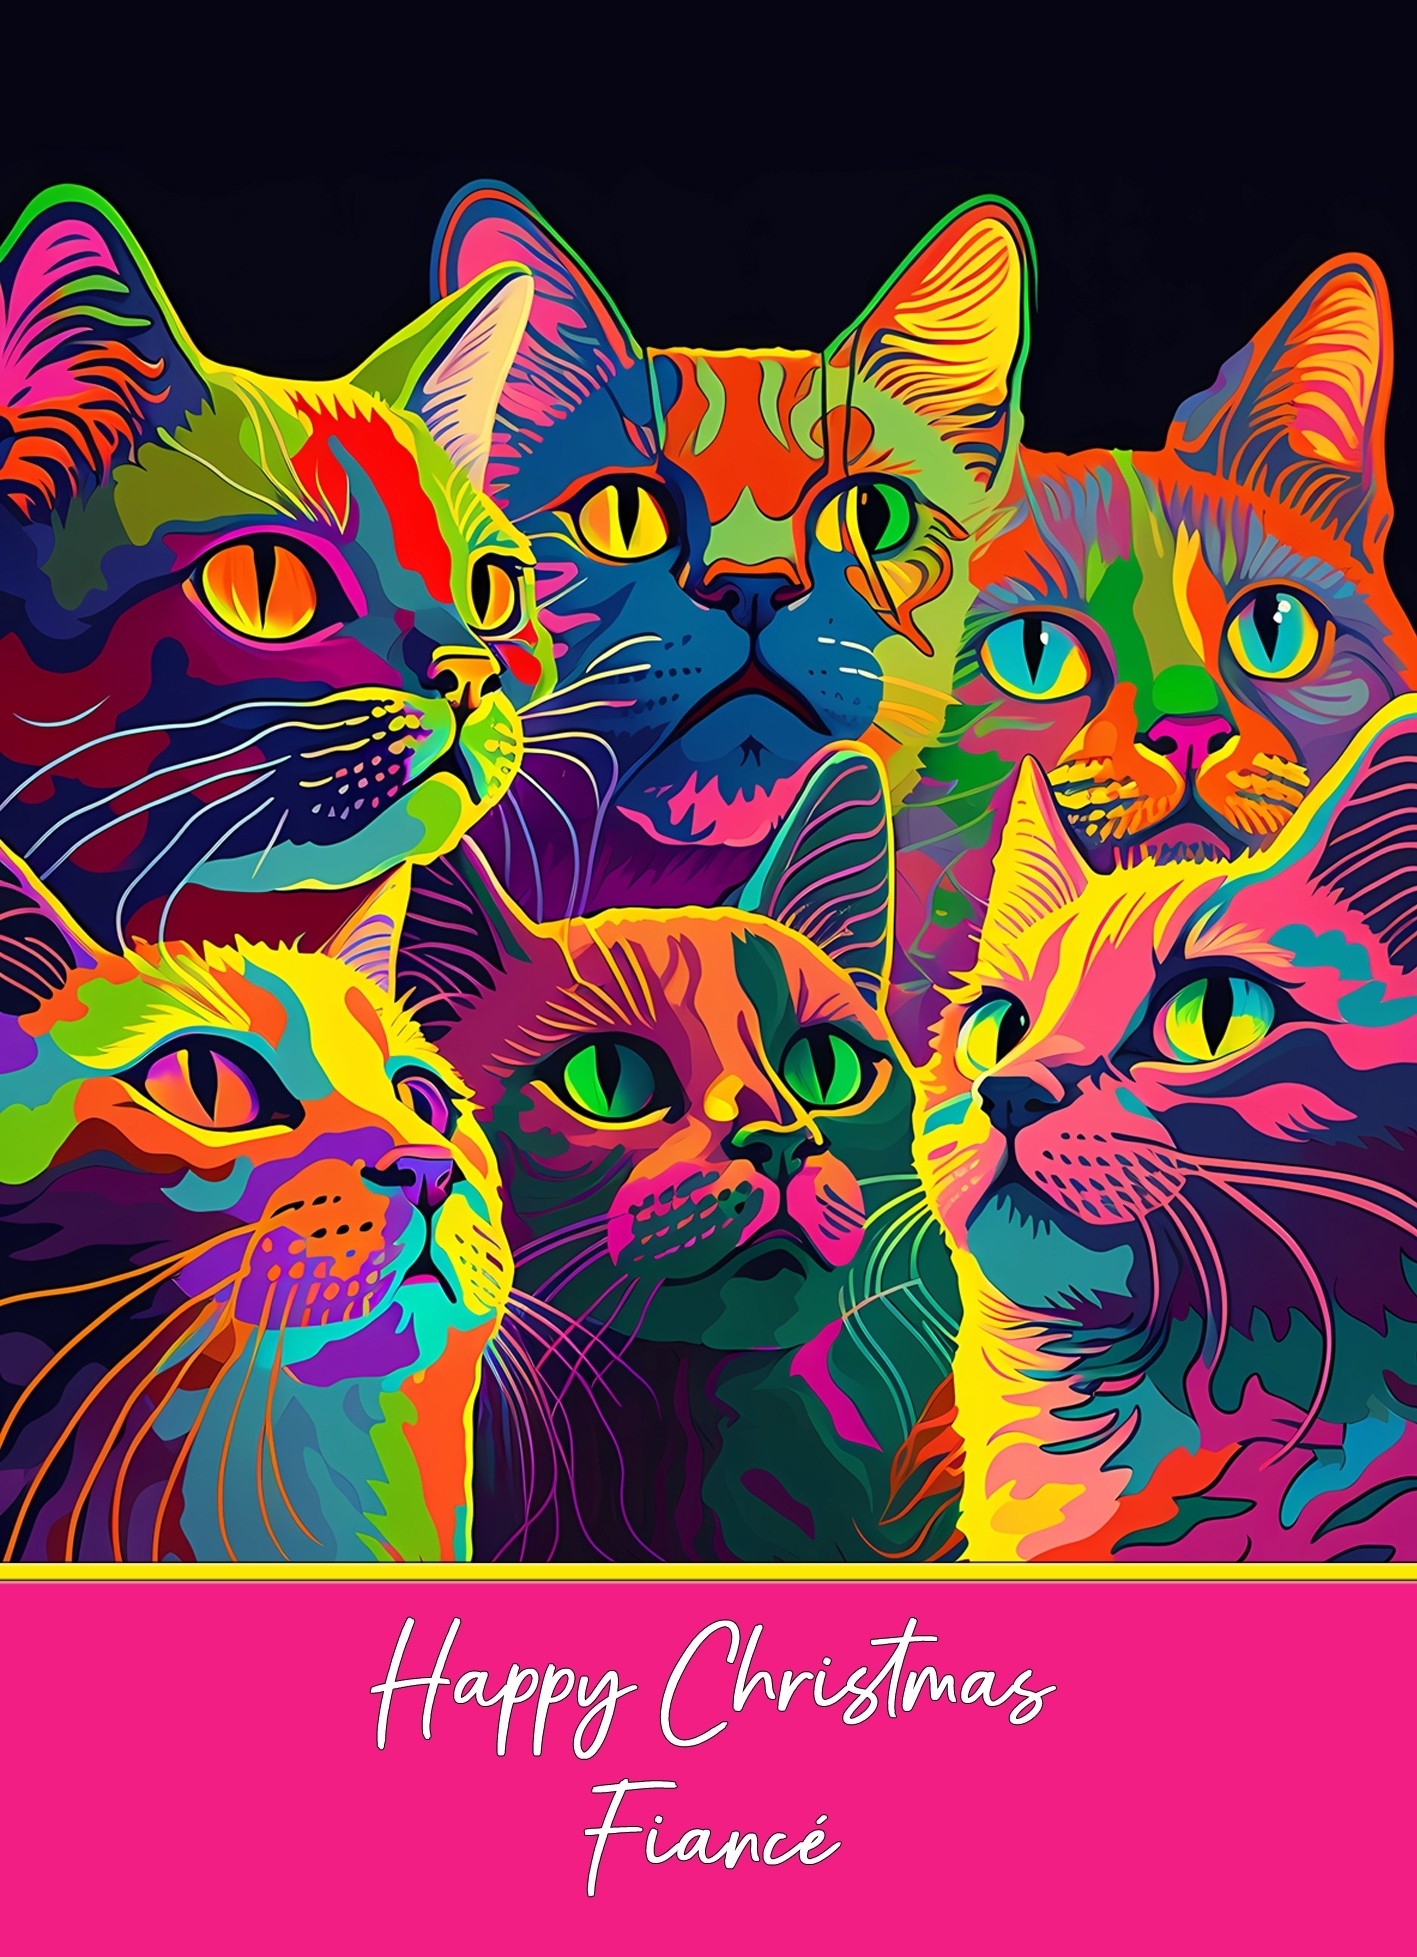 Christmas Card For Fiance (Colourful Cat Art)